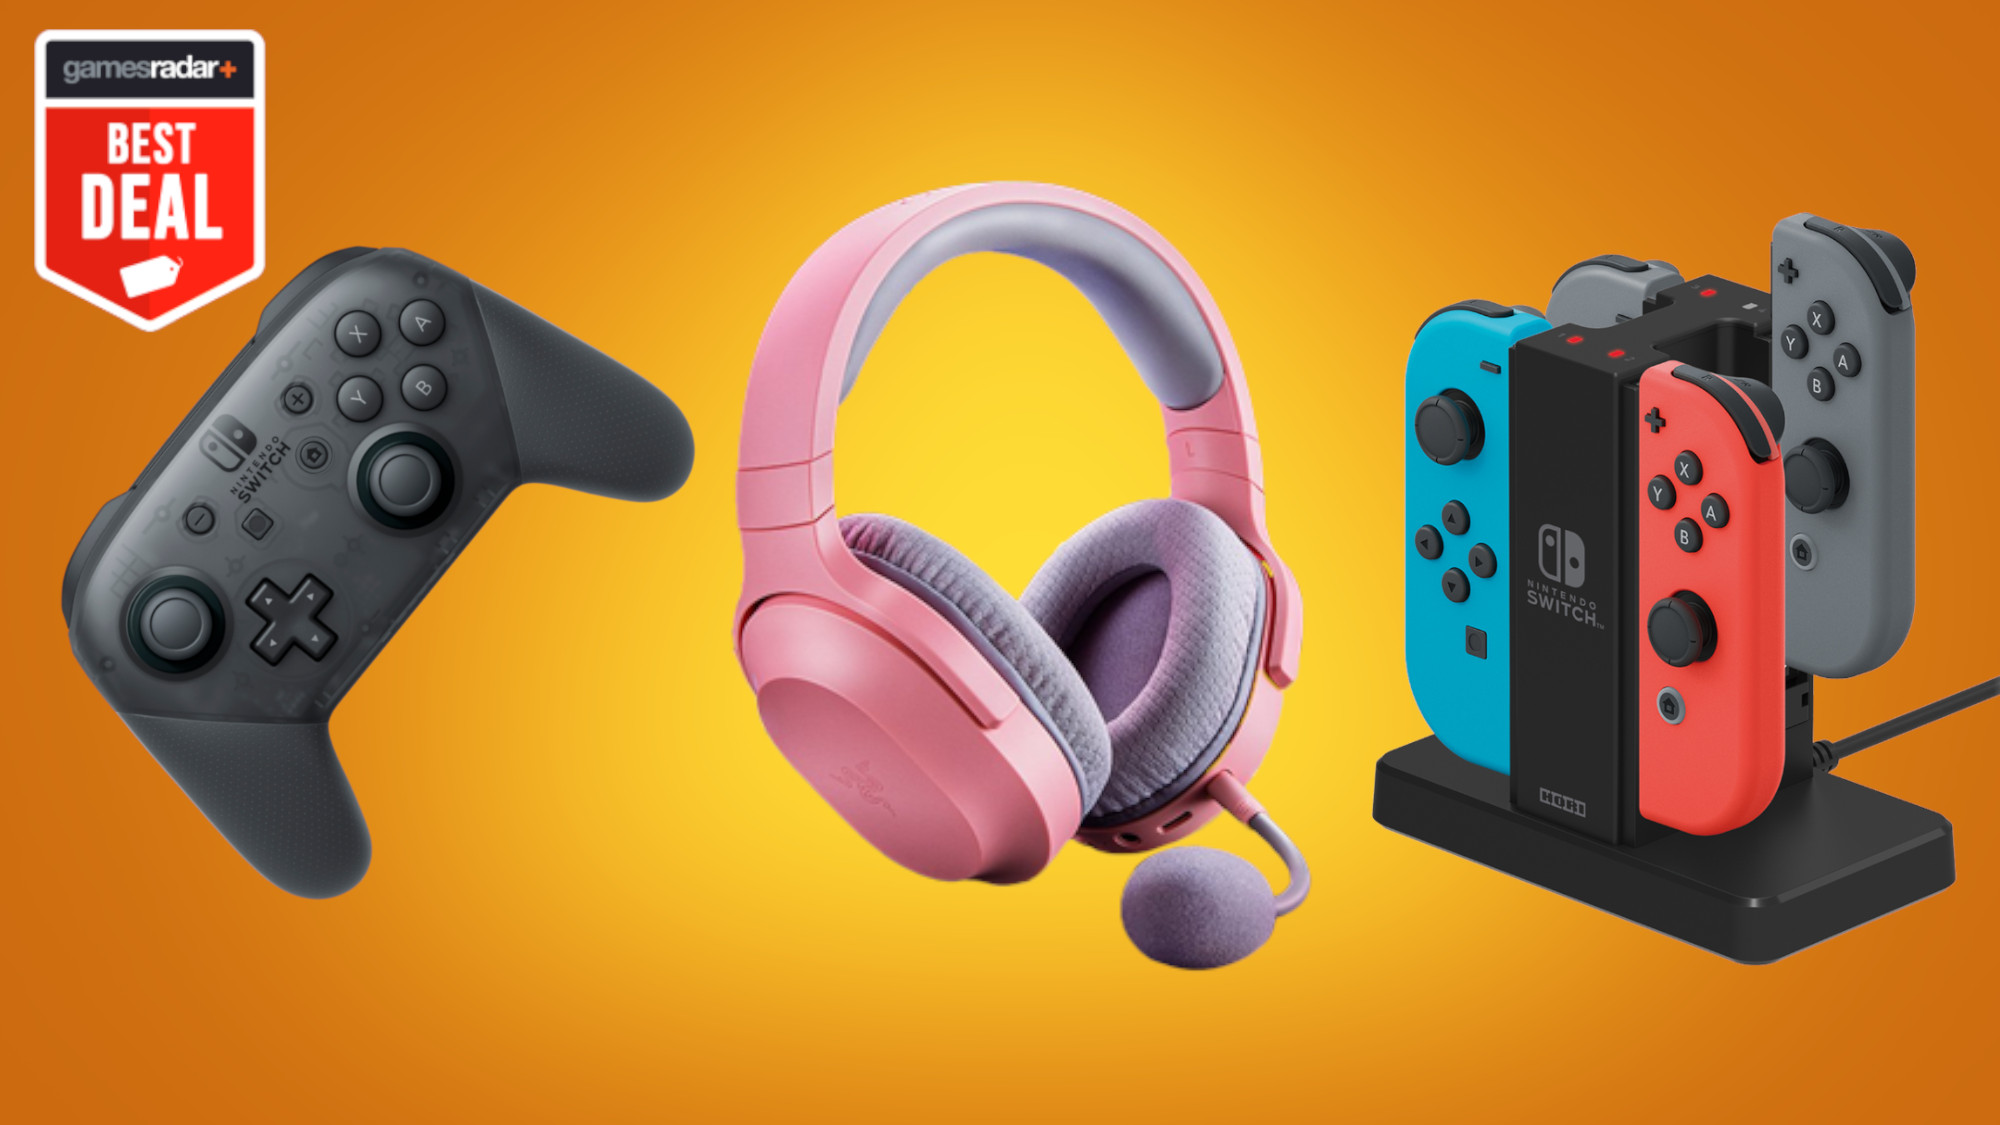 Some of our favorite Nintendo Switch accessories are up to 60% off right  now